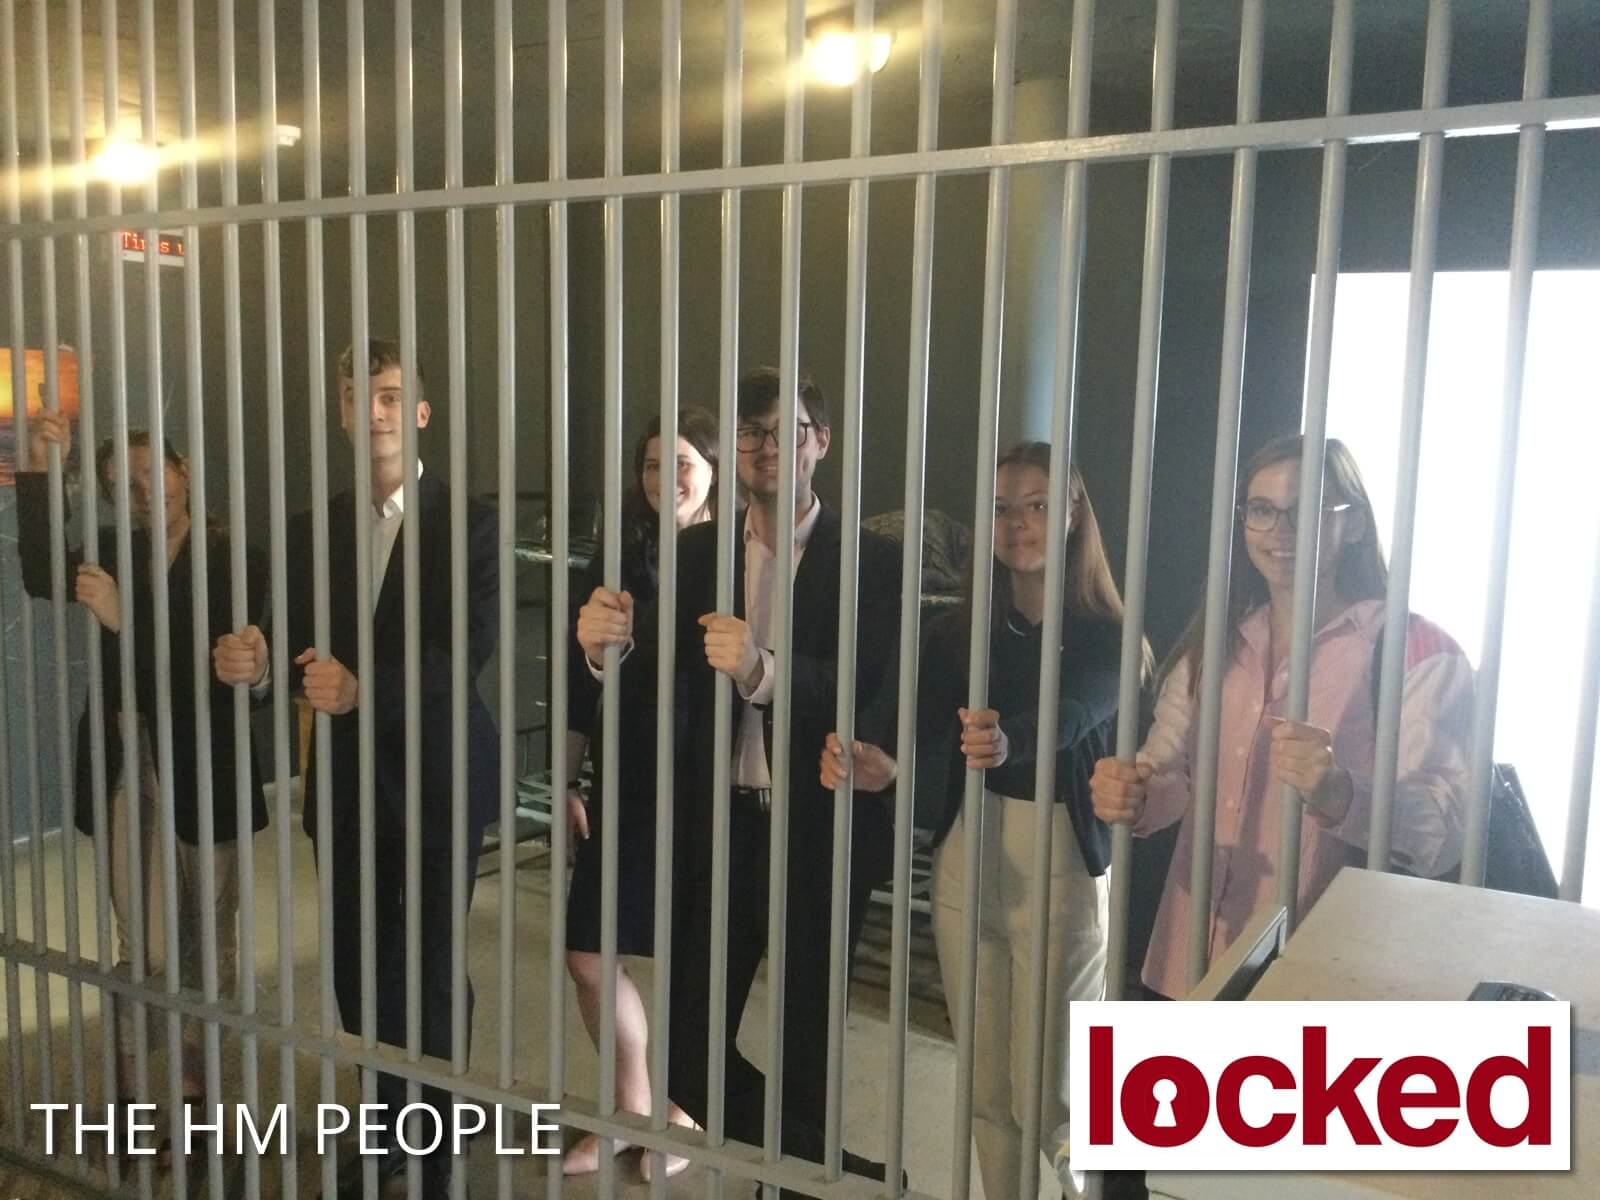 Smiling team members in an escape room, behind the bars of a cage